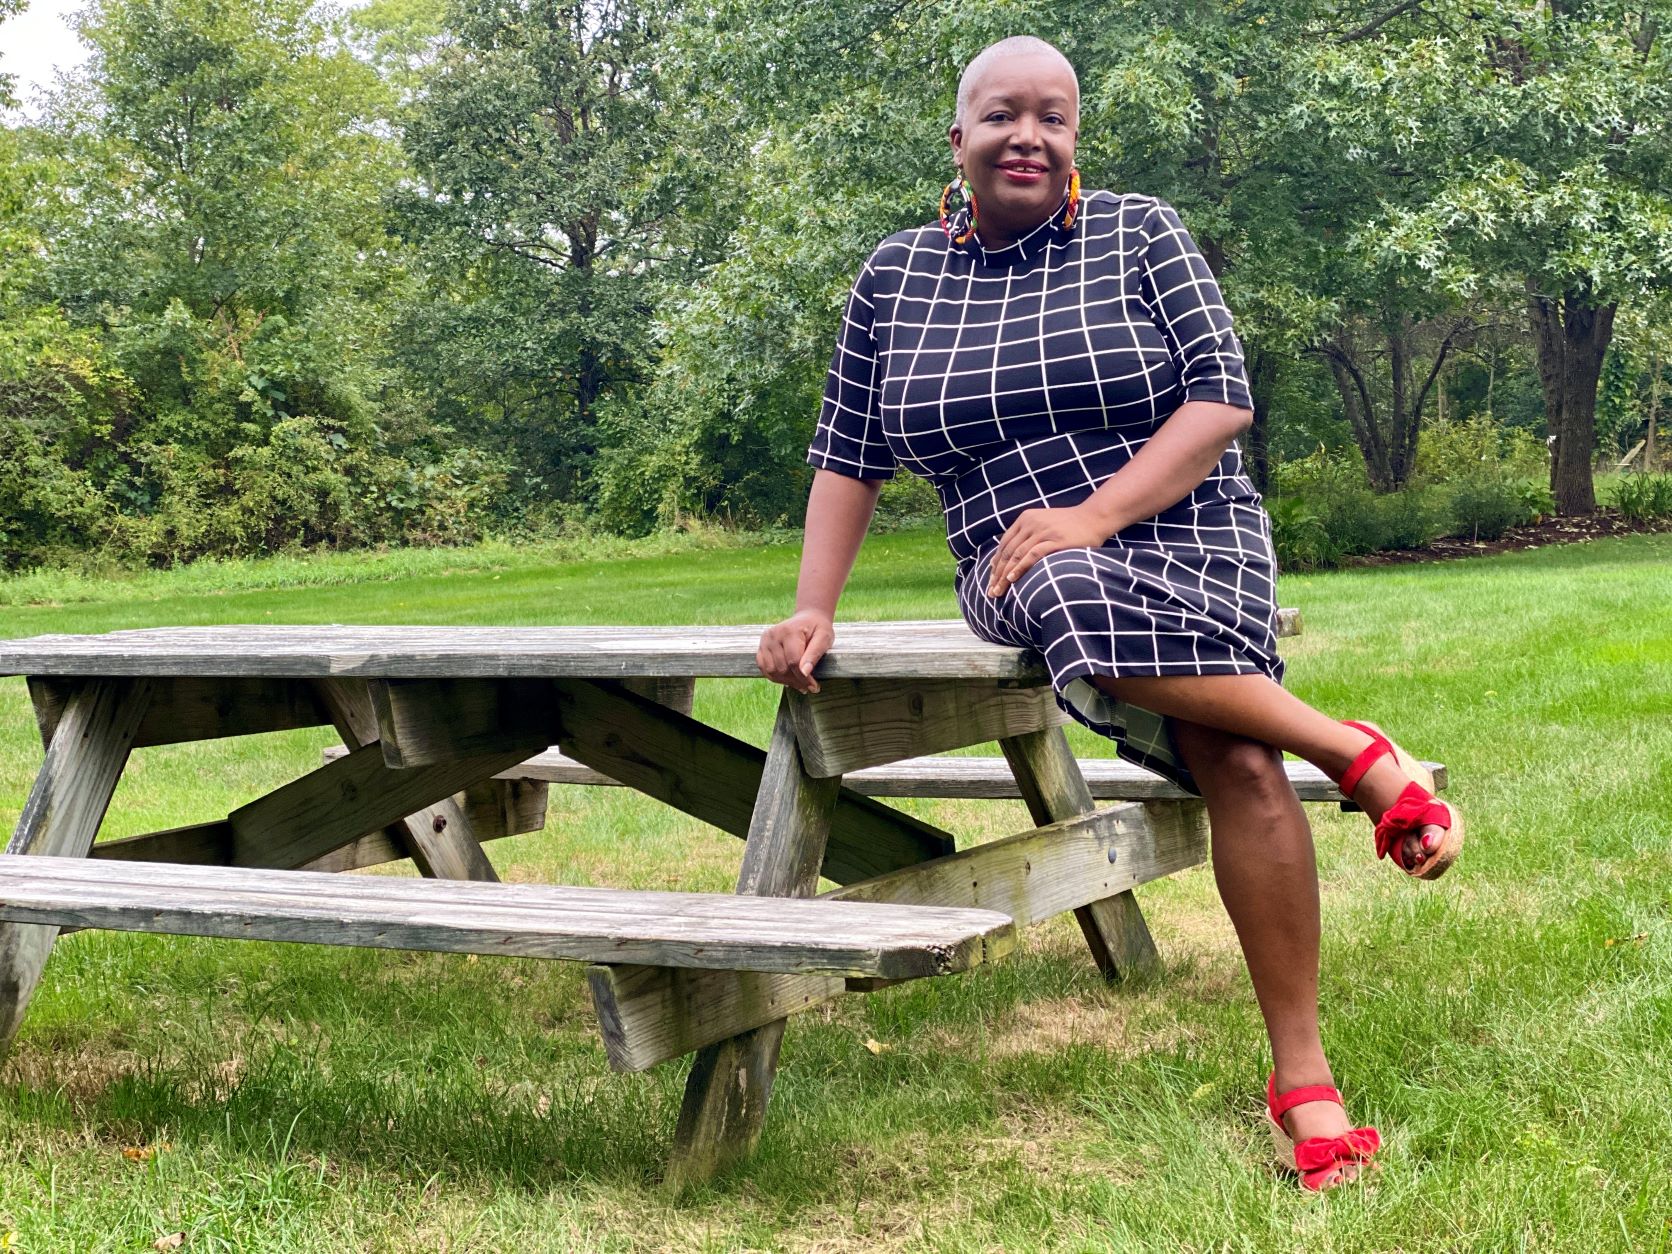 Elaine Dickson MBA '98 leaning against picnic table in black and white dress